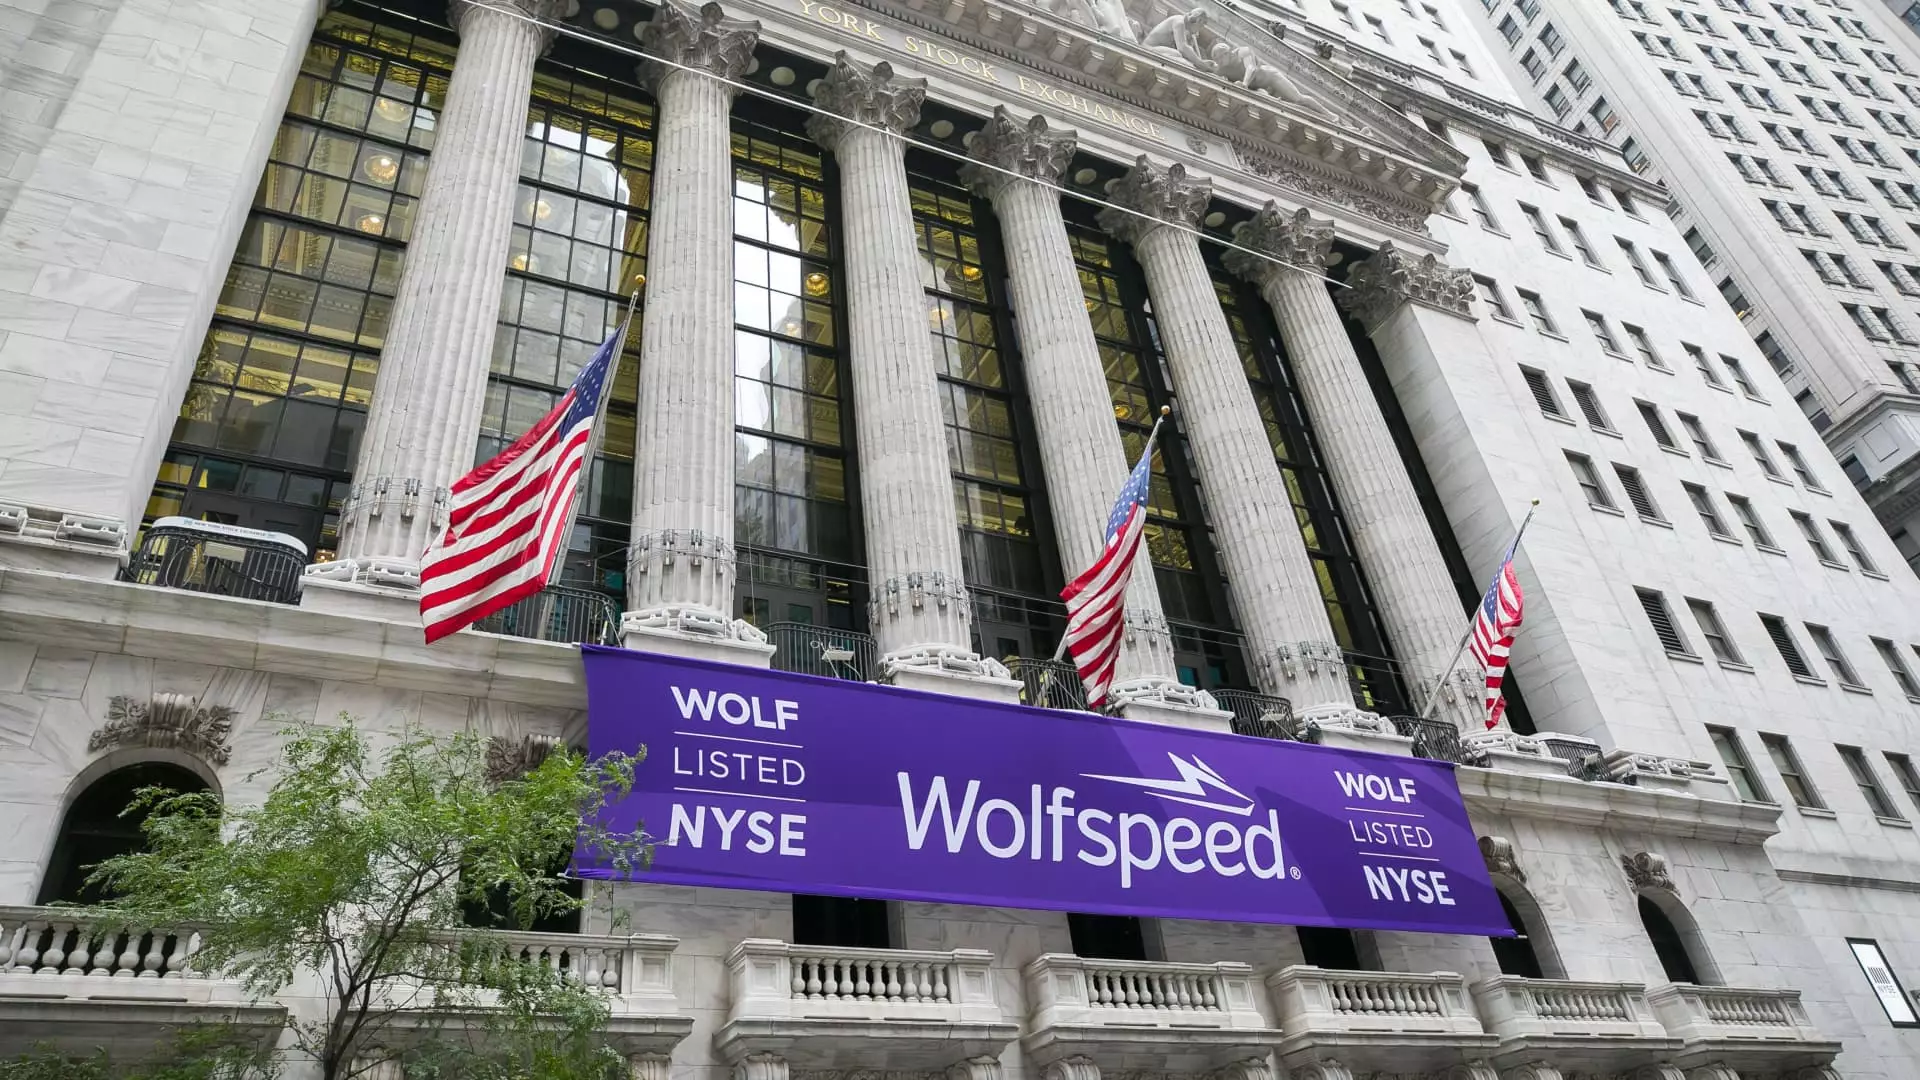 Analyzing Wolfspeed: A Semiconductor Company Under Pressure